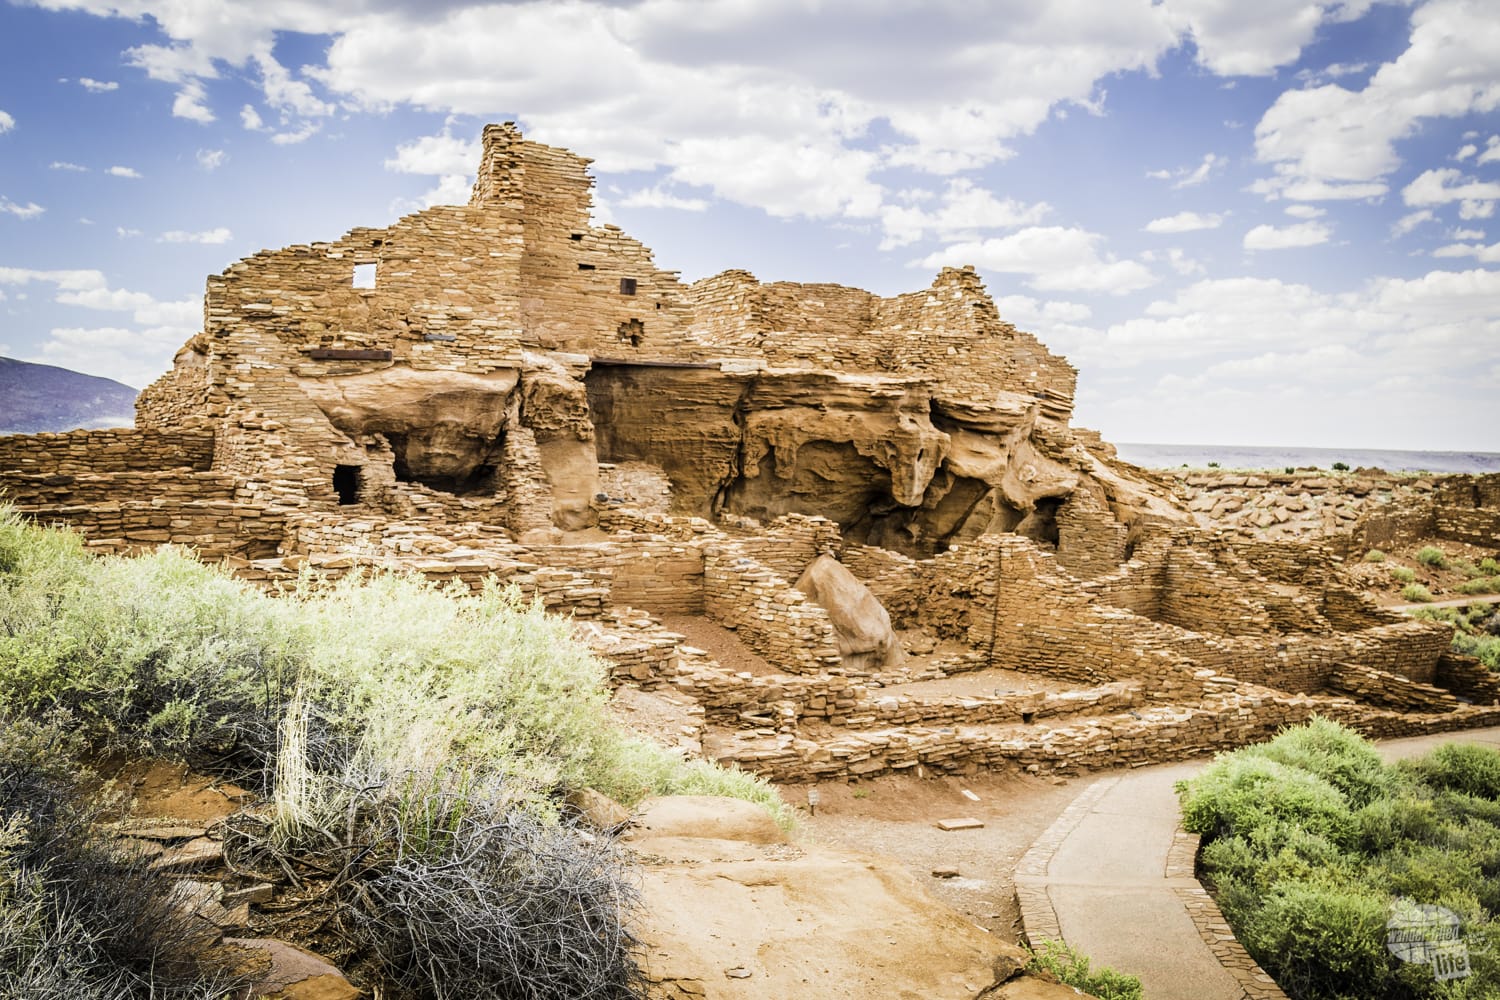 The ruins of the Wupatki Pueblo in Wupatki National Monument.